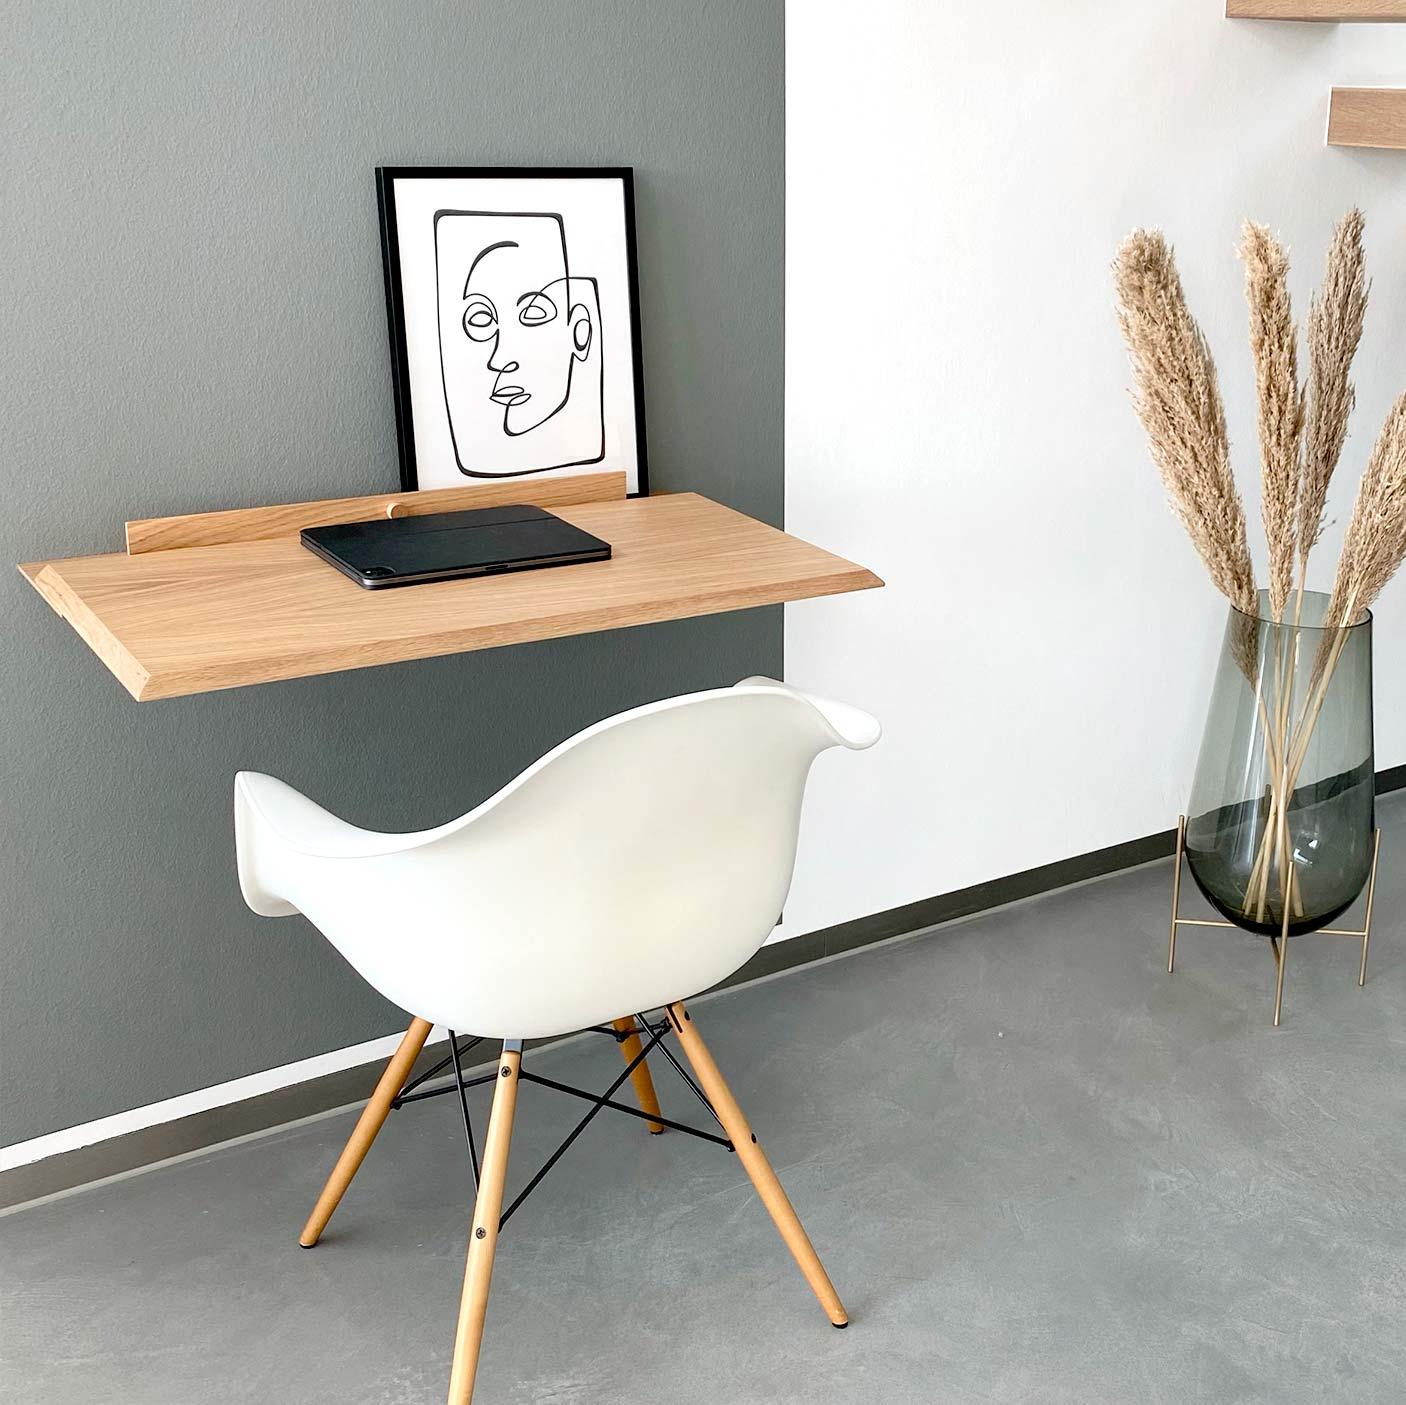 Inspired by the movement that birds draw on the sky when they move their wings up and down, Alada is a timeless and discreet folding desk that allows you take the most advantage of your space.

Thanks to its careful functional design, Alada